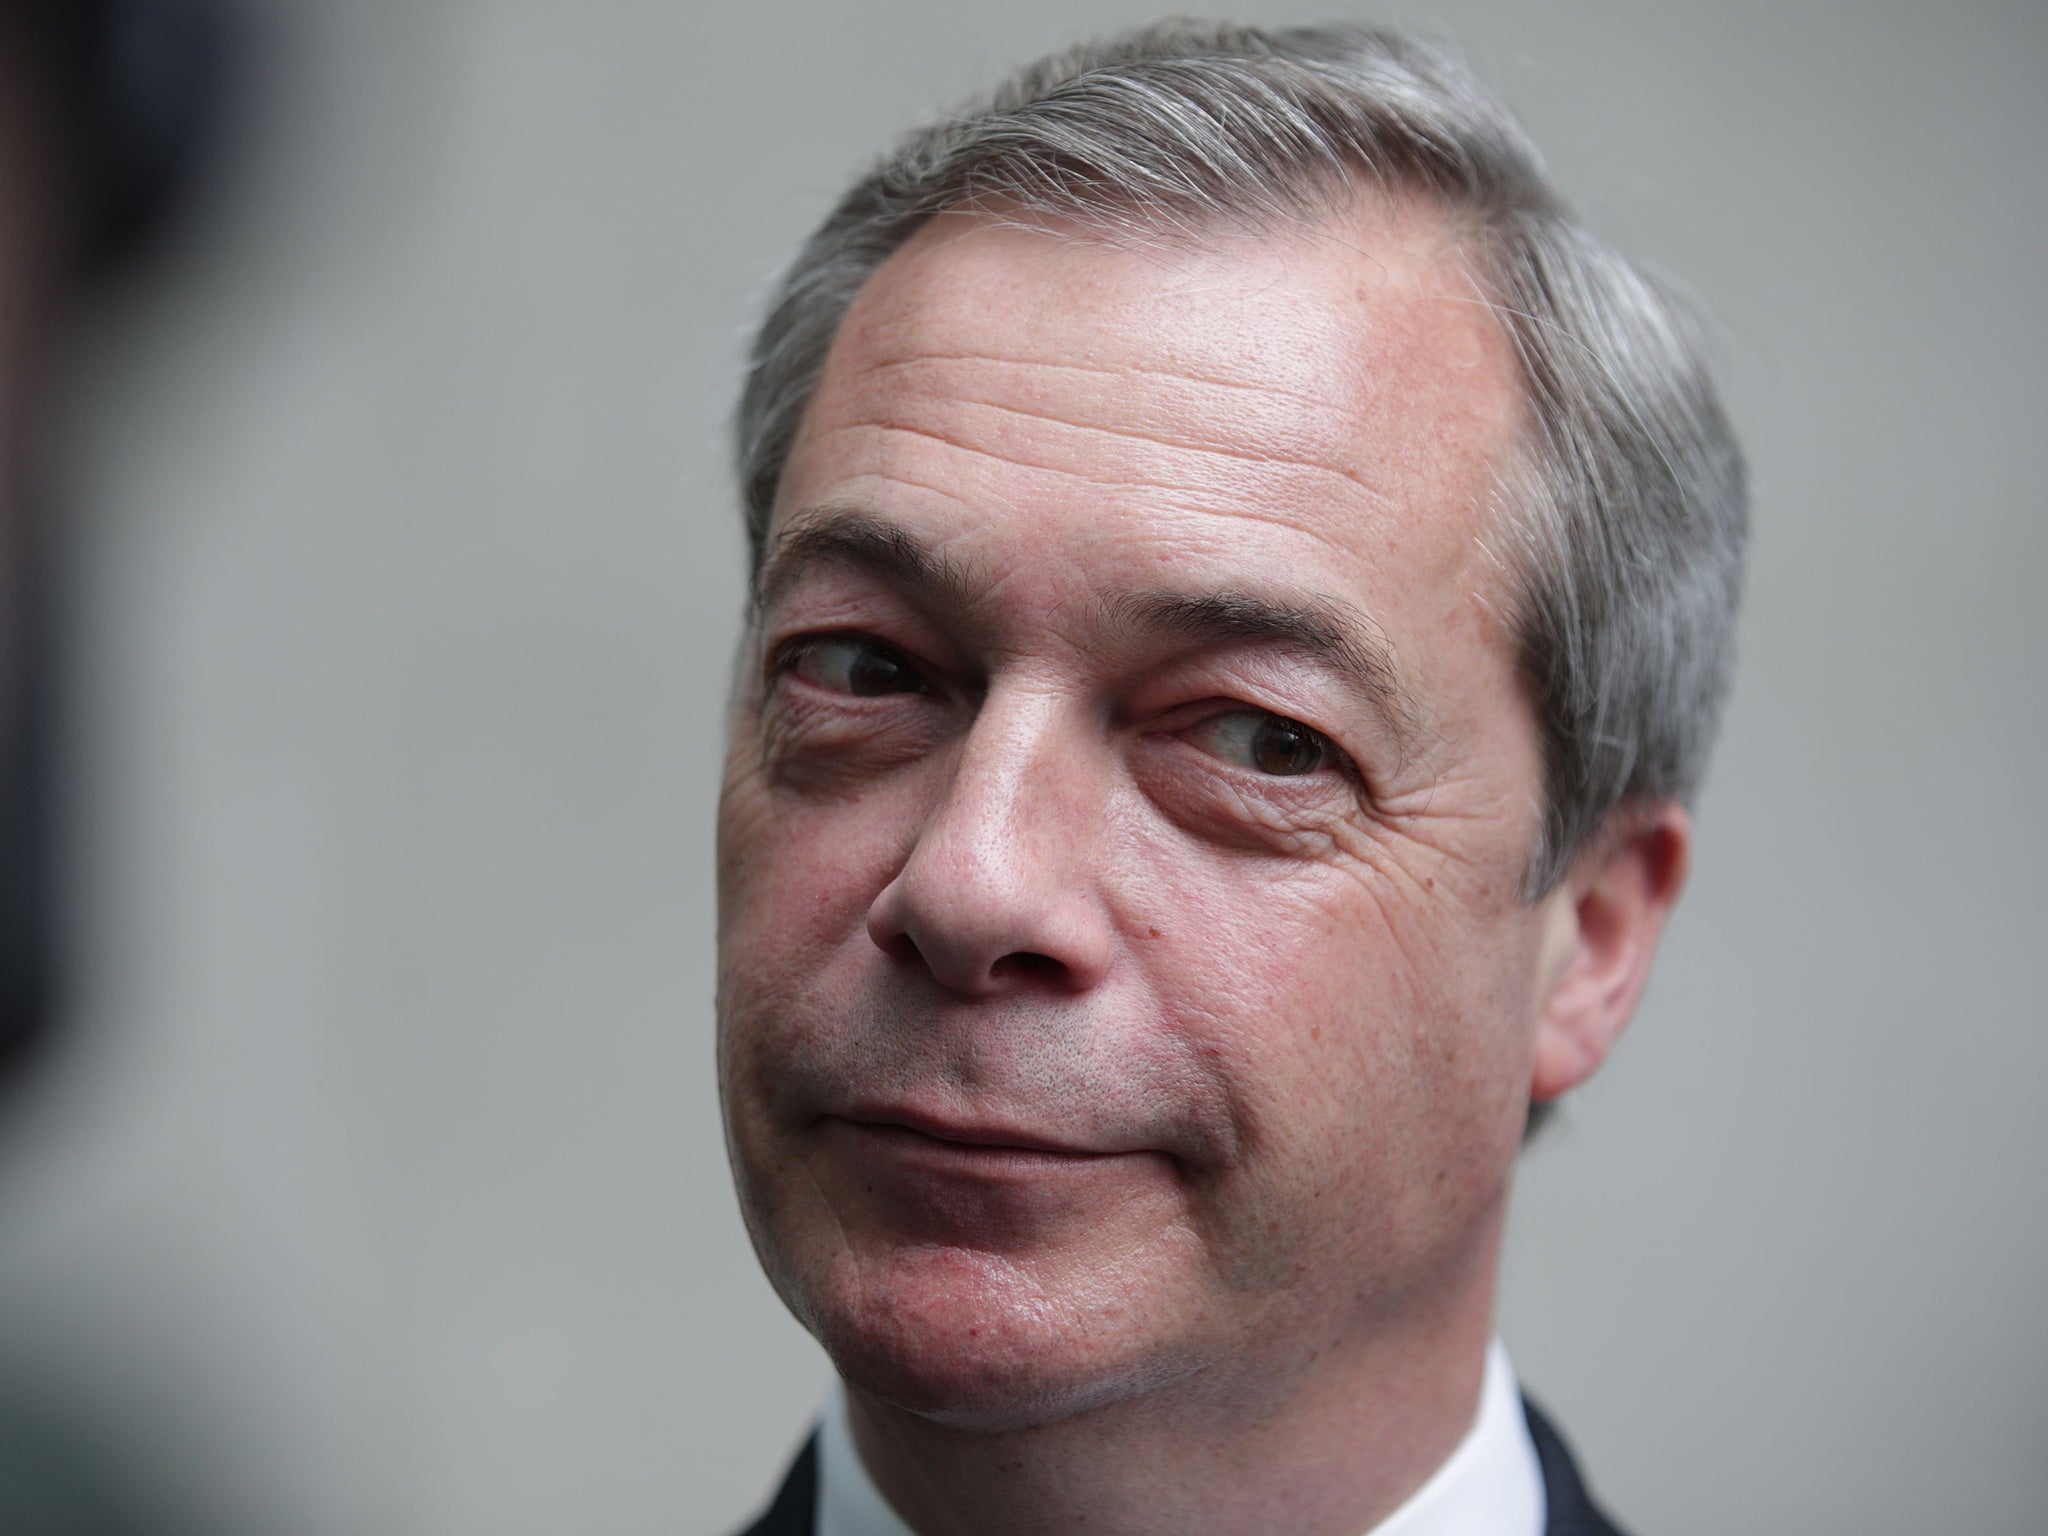 Nigel Farage has denied the allegations as ‘conspiratorial nonsense’